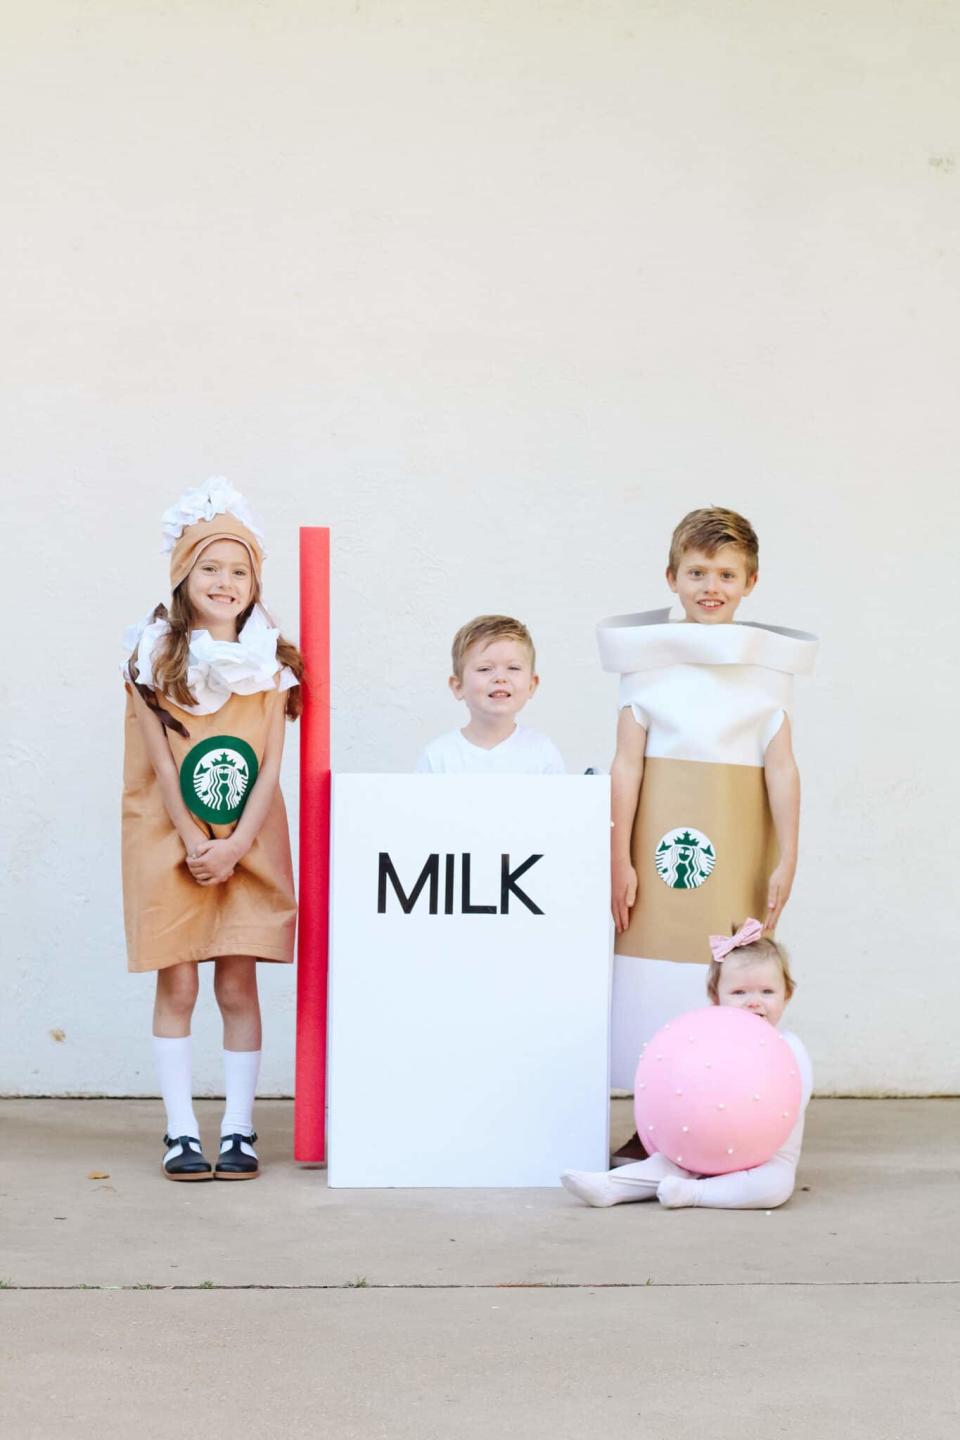 kids dressed as starbucks drinks, milks and a cake pop  (Arin Solange at Home )